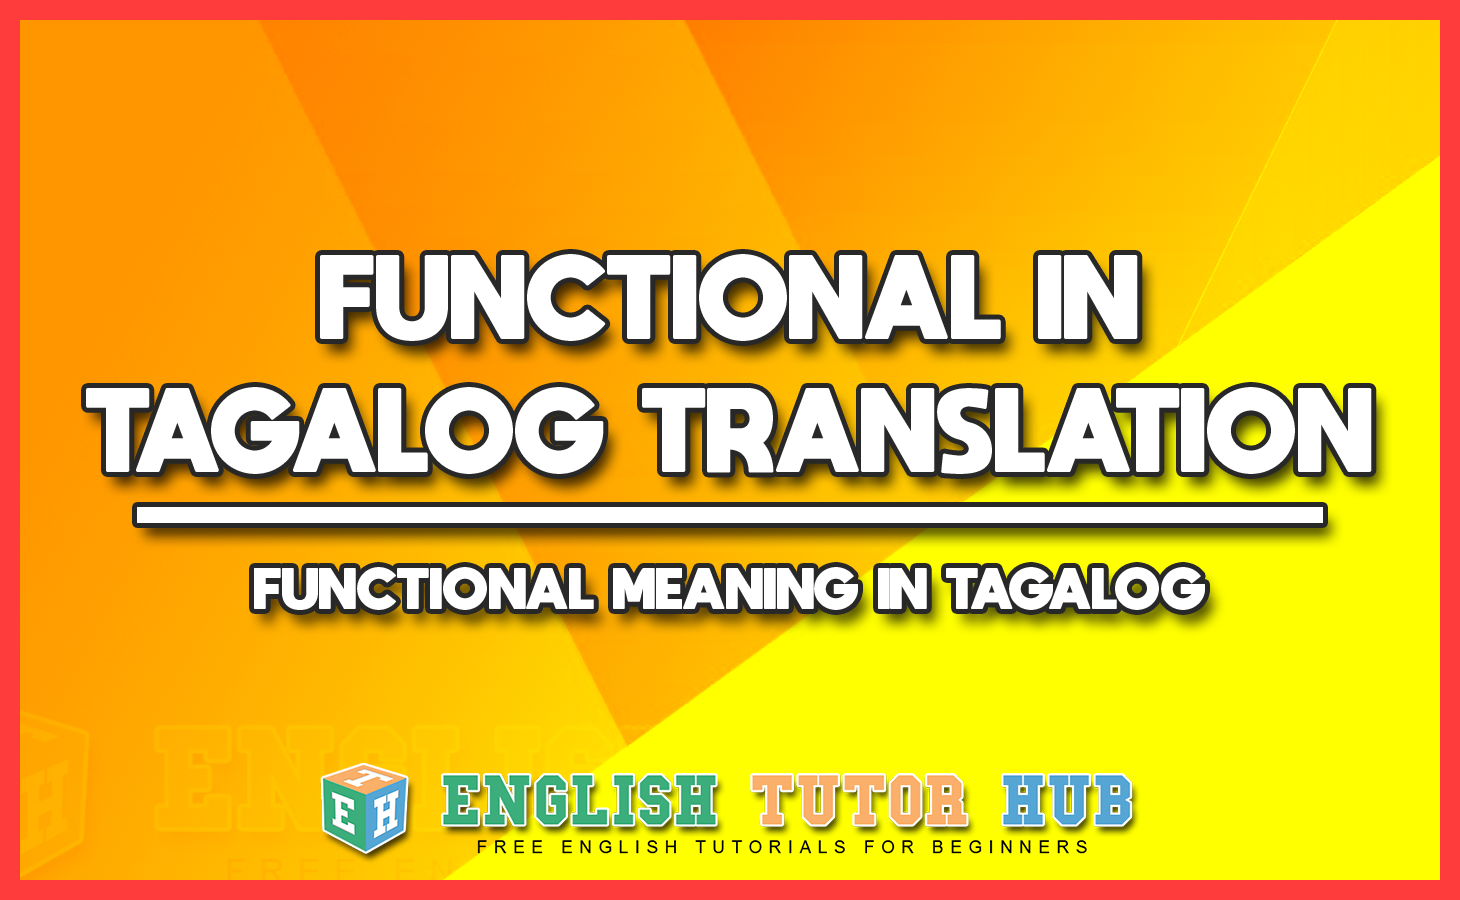 FUNCTIONAL IN TAGALOG TRANSLATION - FUNCTIONAL MEANING IN TAGALOG